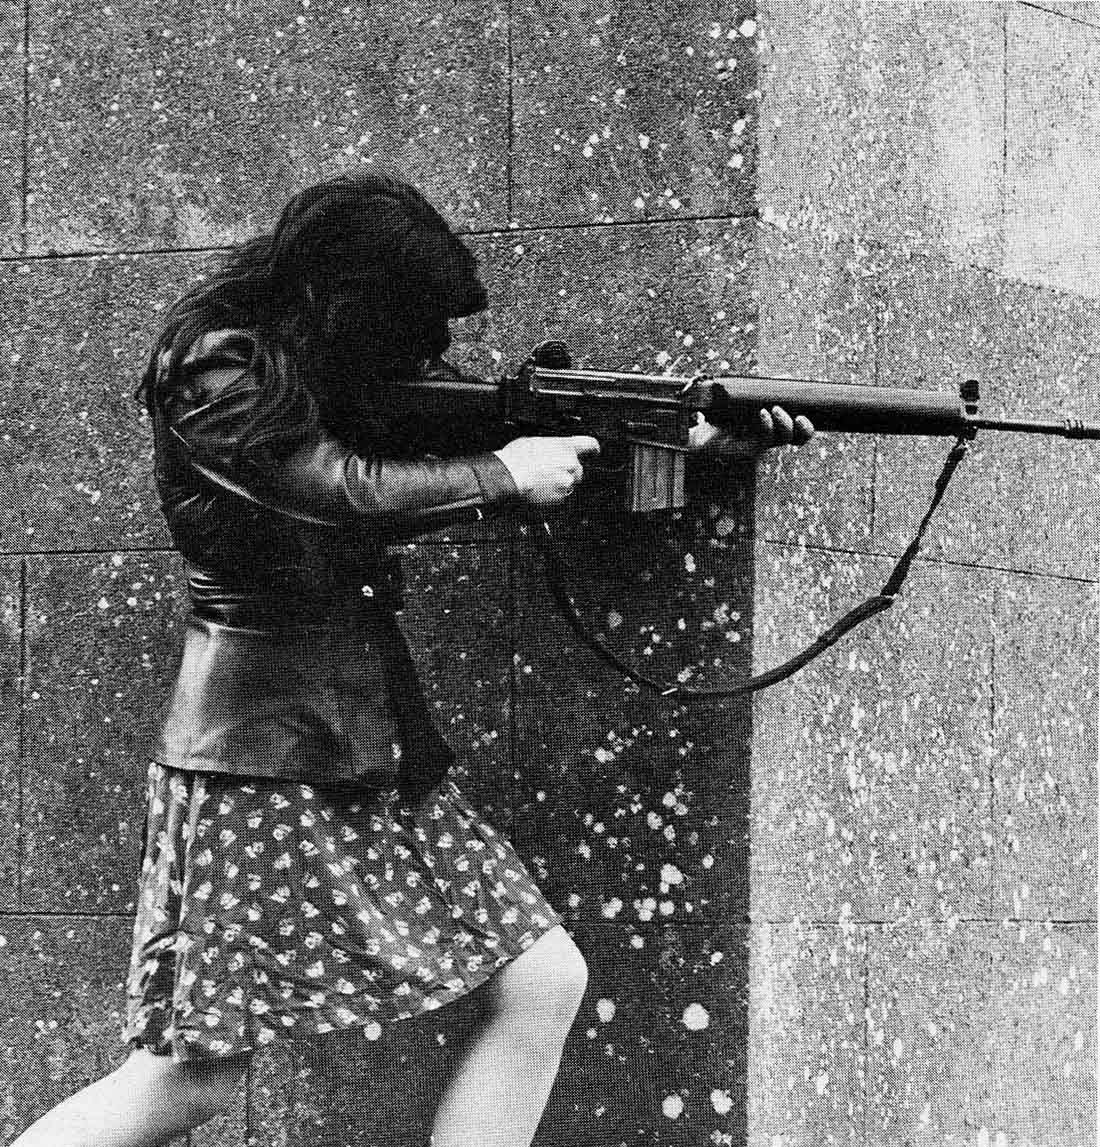 A woman IRA volunteer on active service in West Belfast with an AR18 assault rifle.